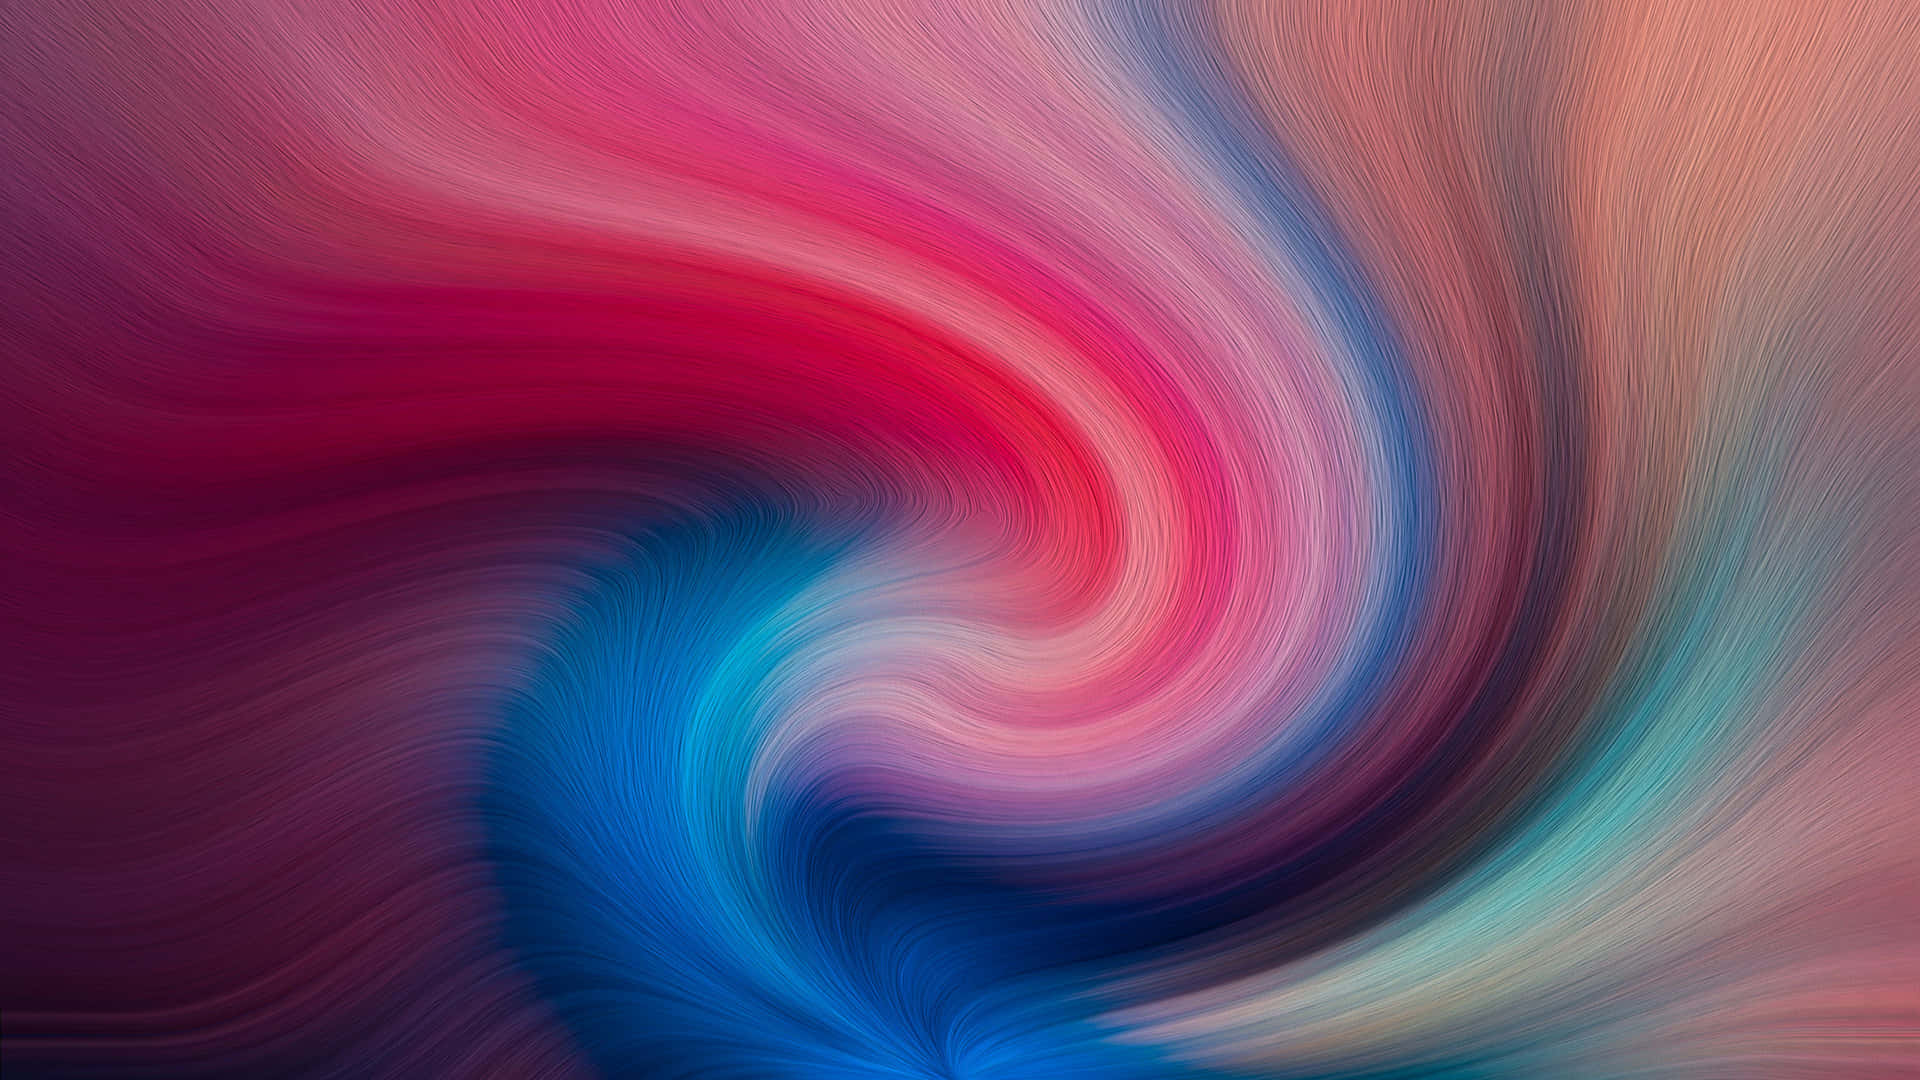 "A colorful swirl of hues from the autumn sky." Wallpaper